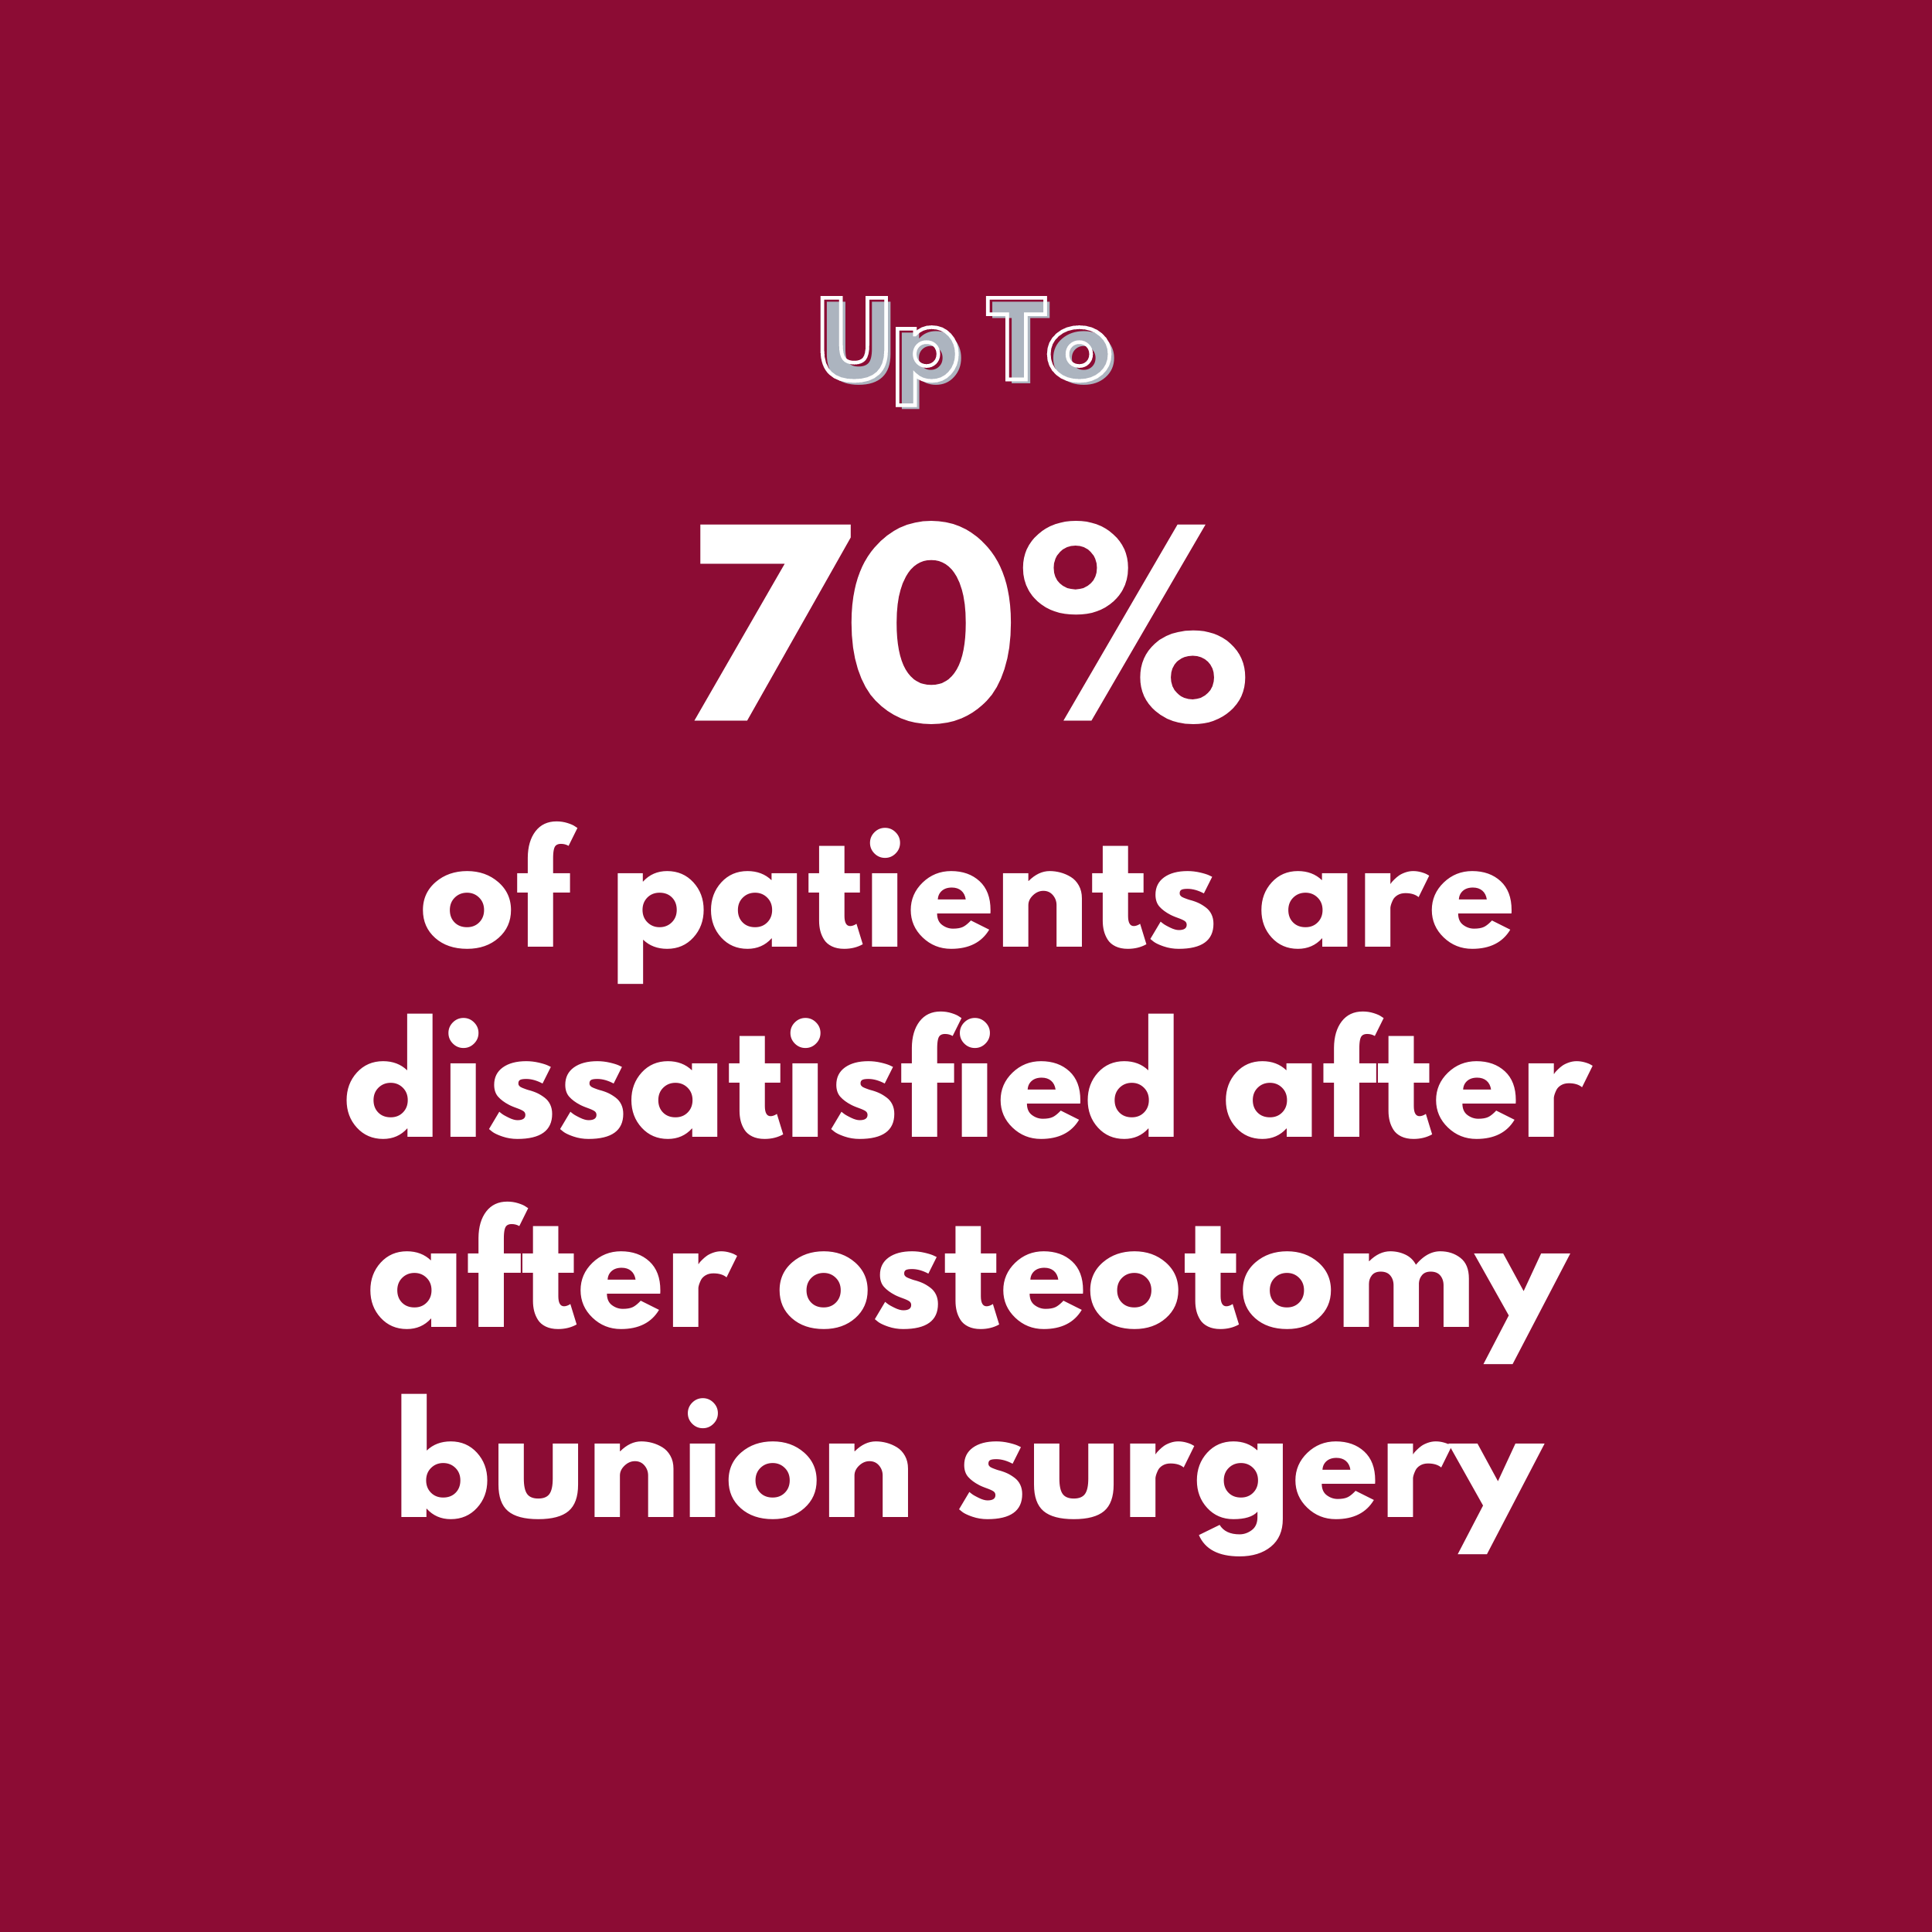 andersen-orthopedics-up-to-70%-patients-dissatisfied-after-oseteomoty-surgery.png